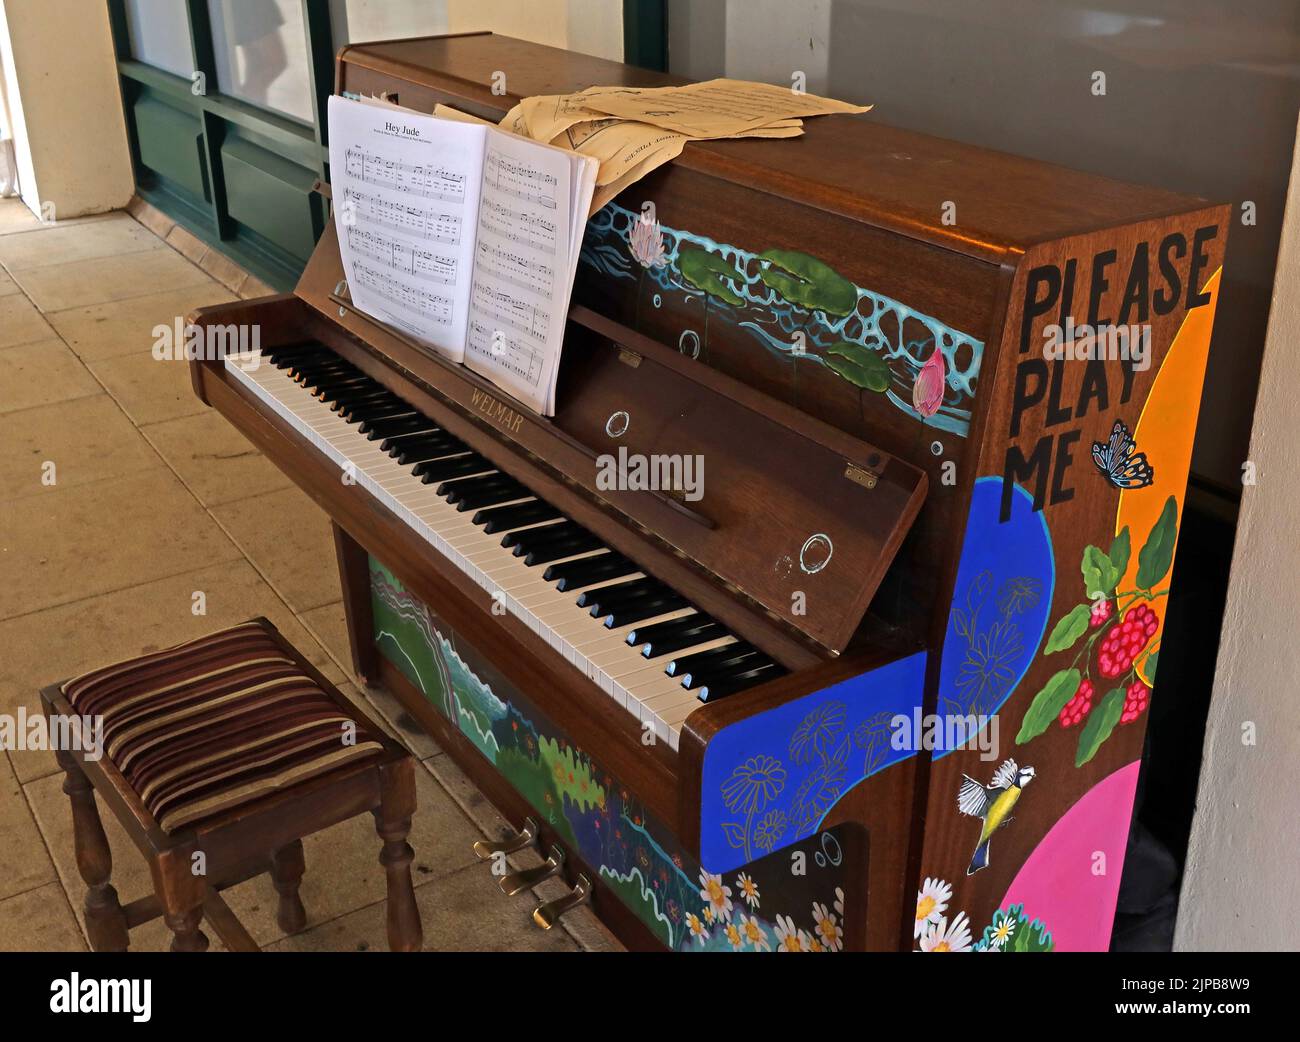 Public Community Piano,provided to play-Please Play Me, at West Street, Chipping Norton, West Oxfordshire, Oxfordshire, South East England,UK,OX7 5LH Stock Photo